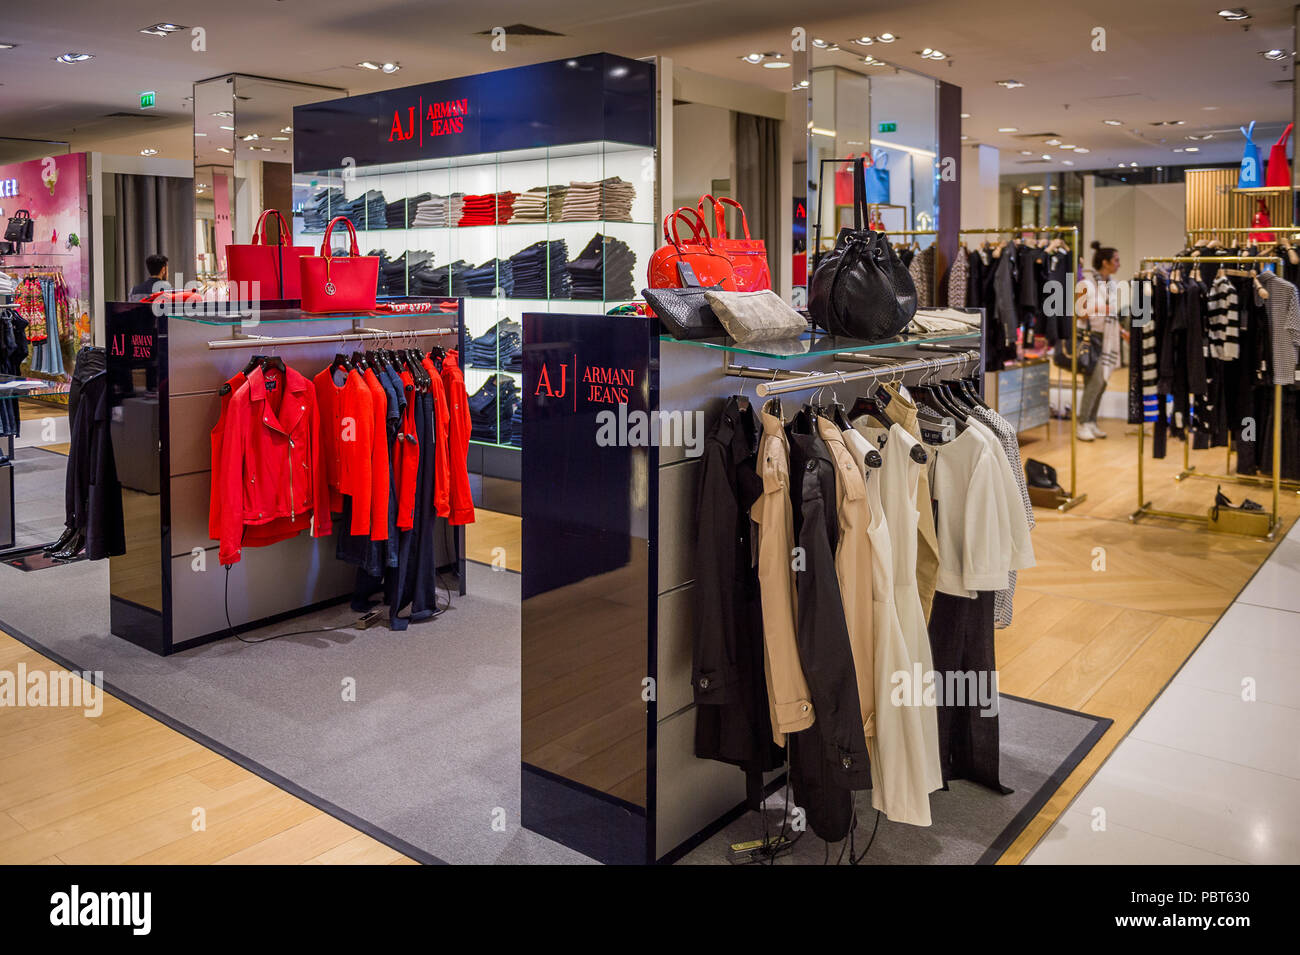 PARIS, FRANCE - JUN 6, 2015: Armani section in the Galeries Lafayette city  mall. It was open in 1912 Stock Photo - Alamy